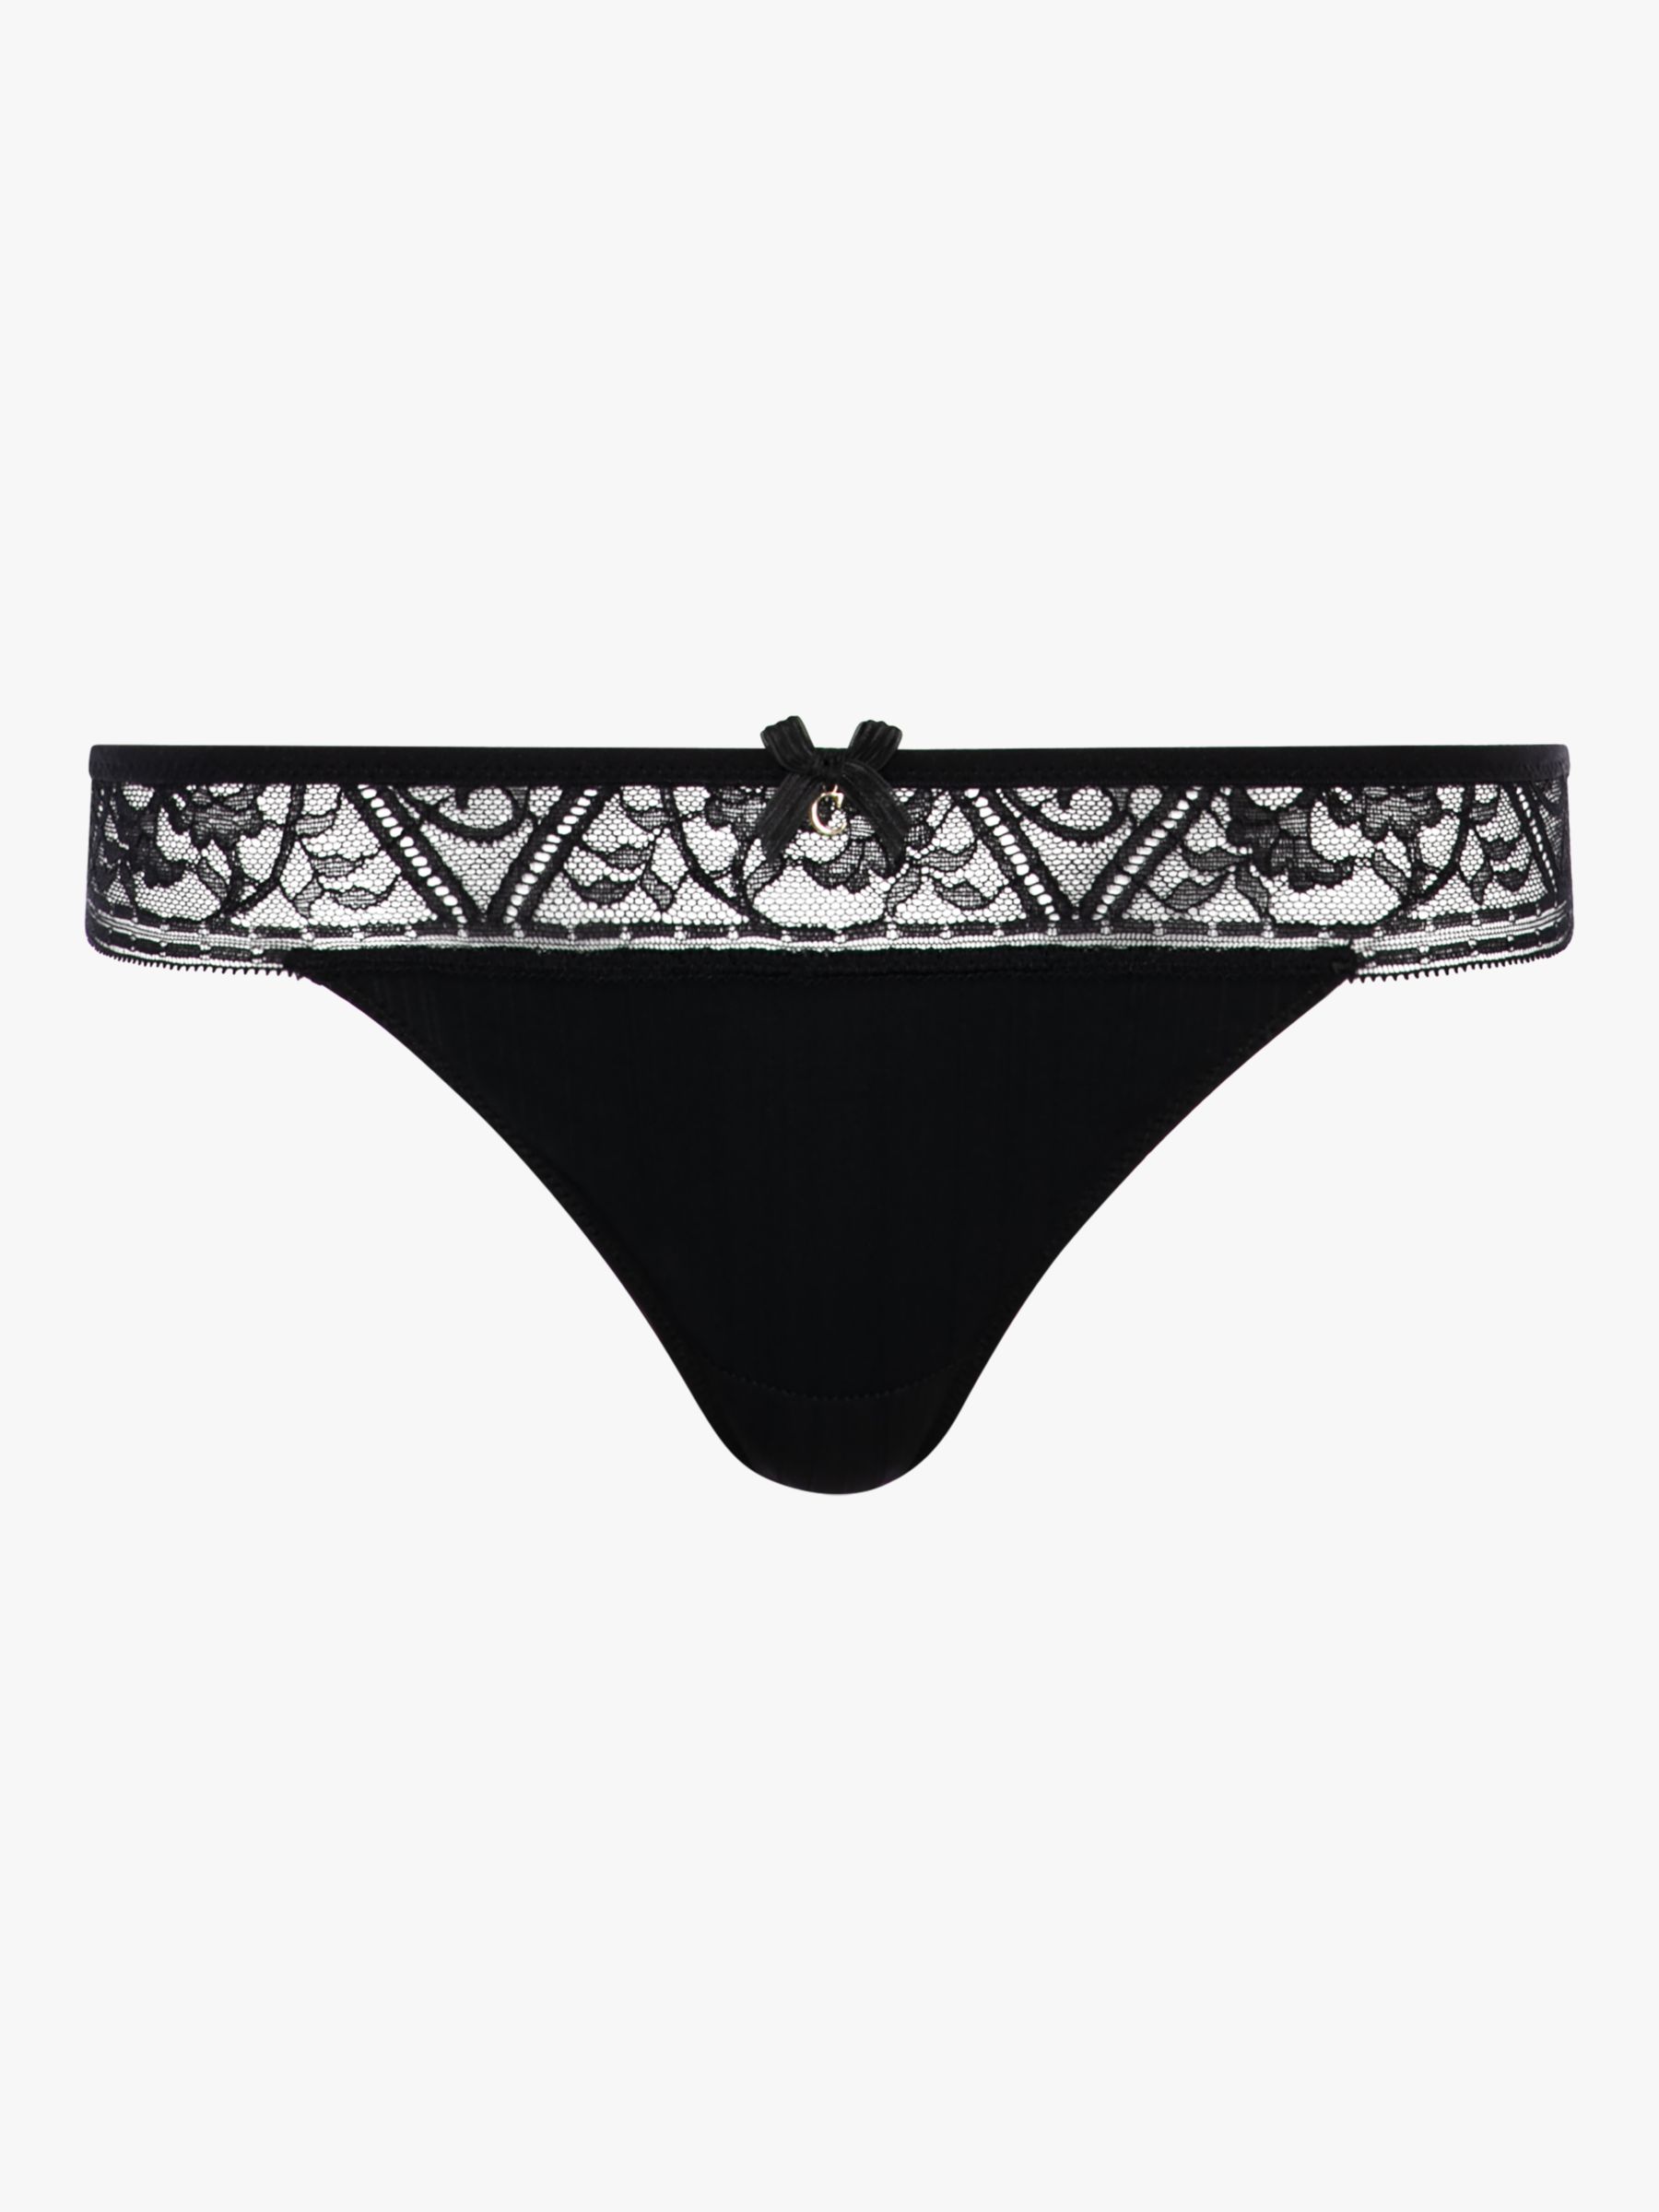 Buy Chantelle Alto Tanga Knickers Online at johnlewis.com